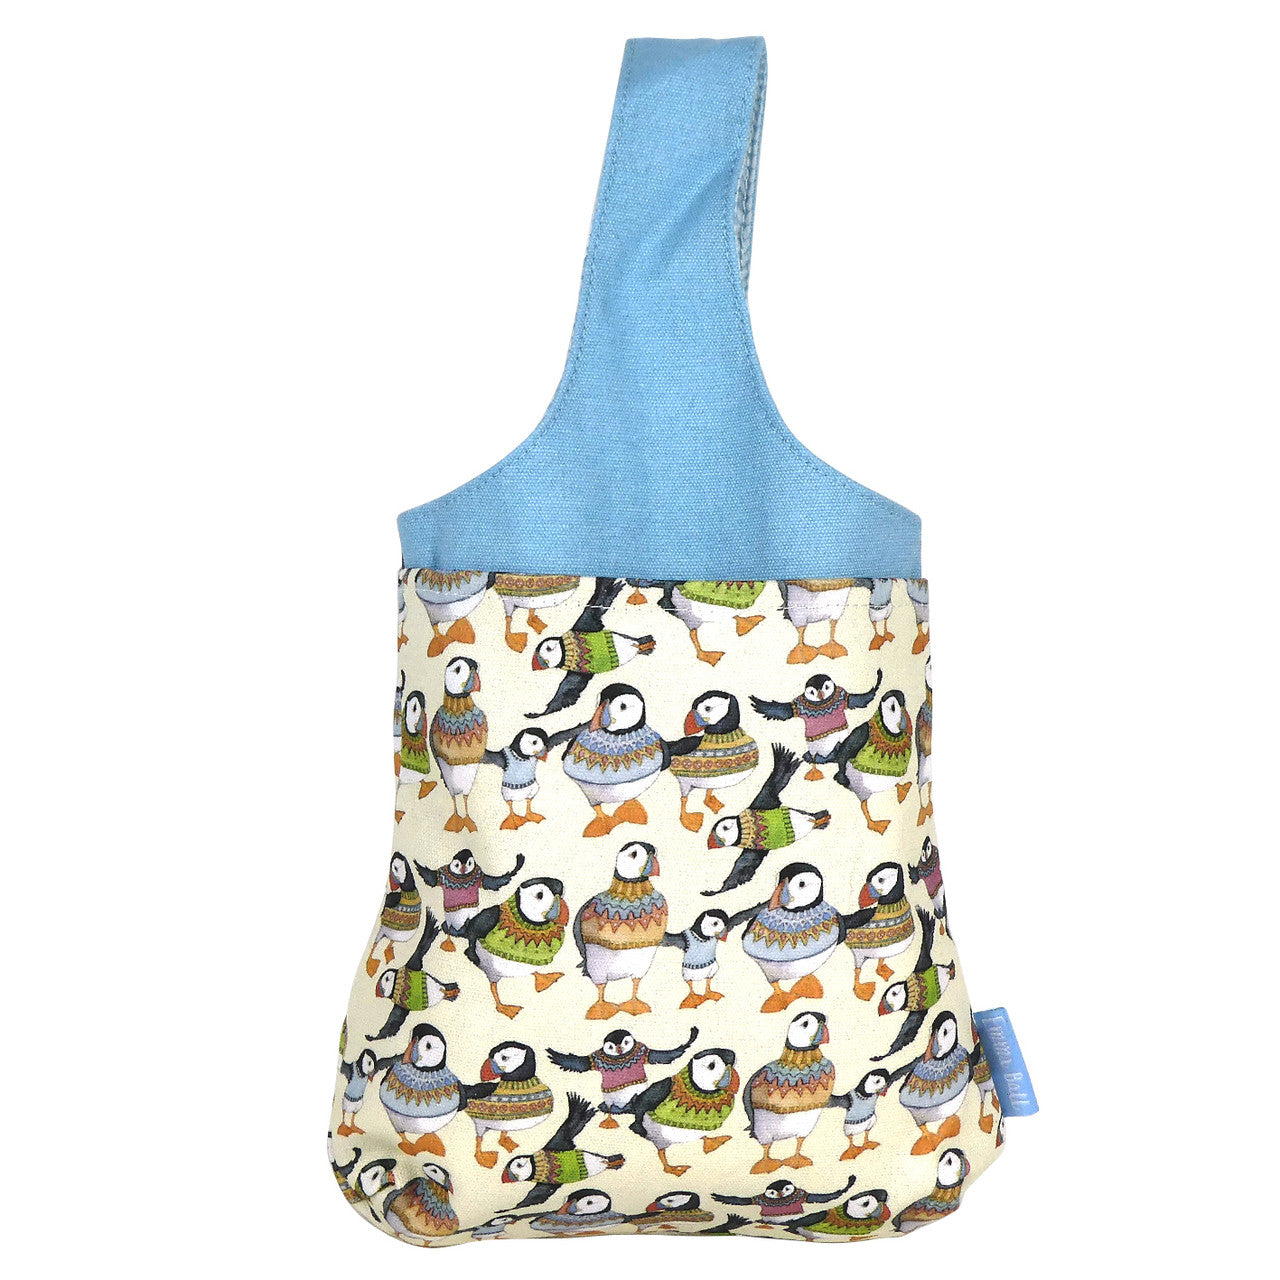 Woolly Puffins 100% cotton Small Wrist Bag from Emma Ball.